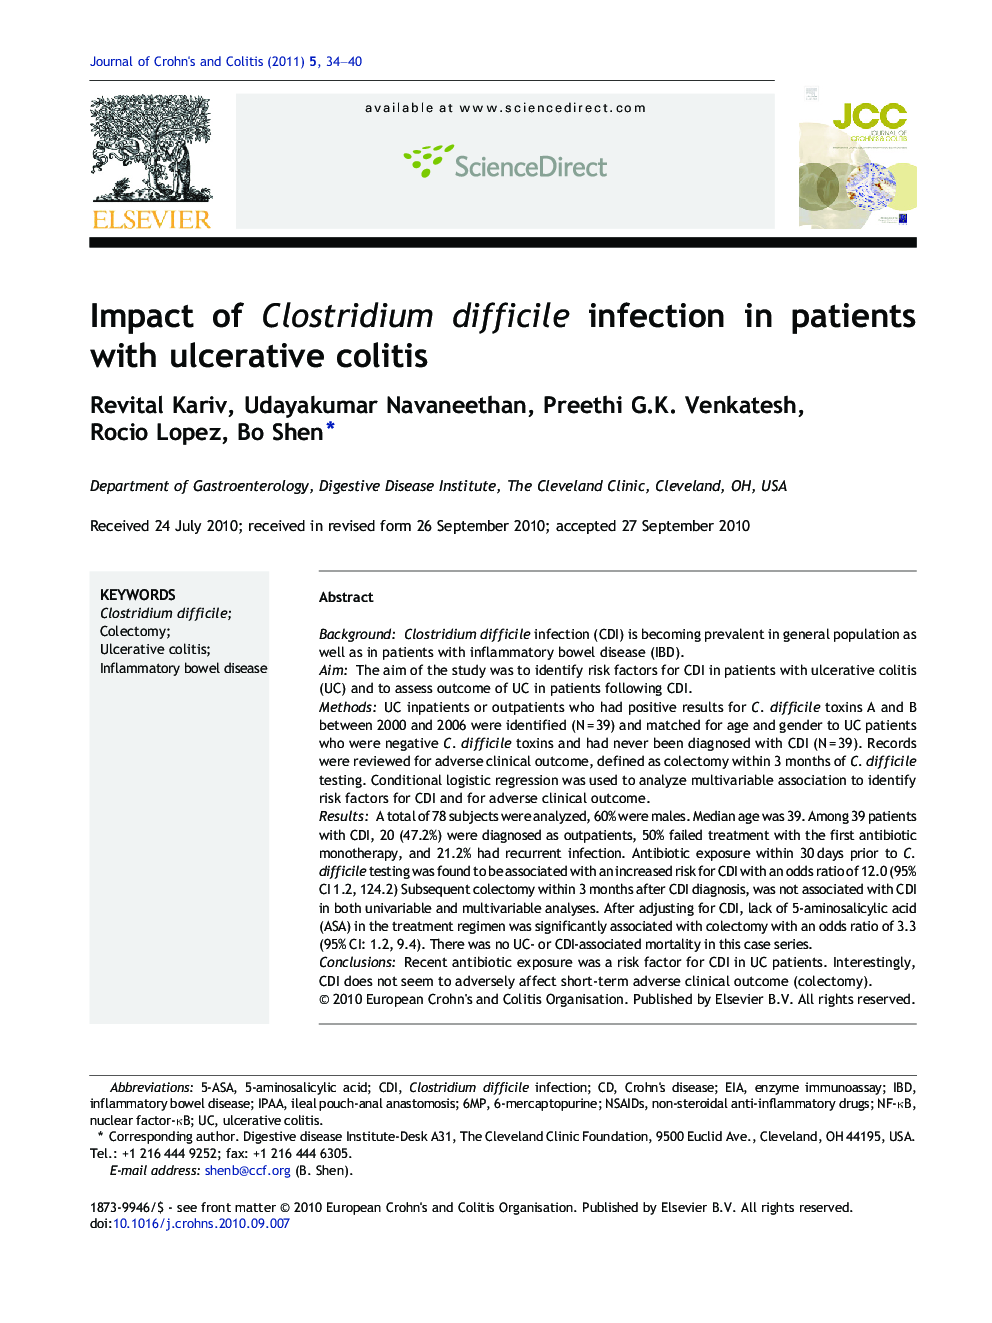 Impact of Clostridium difficile infection in patients with ulcerative colitis